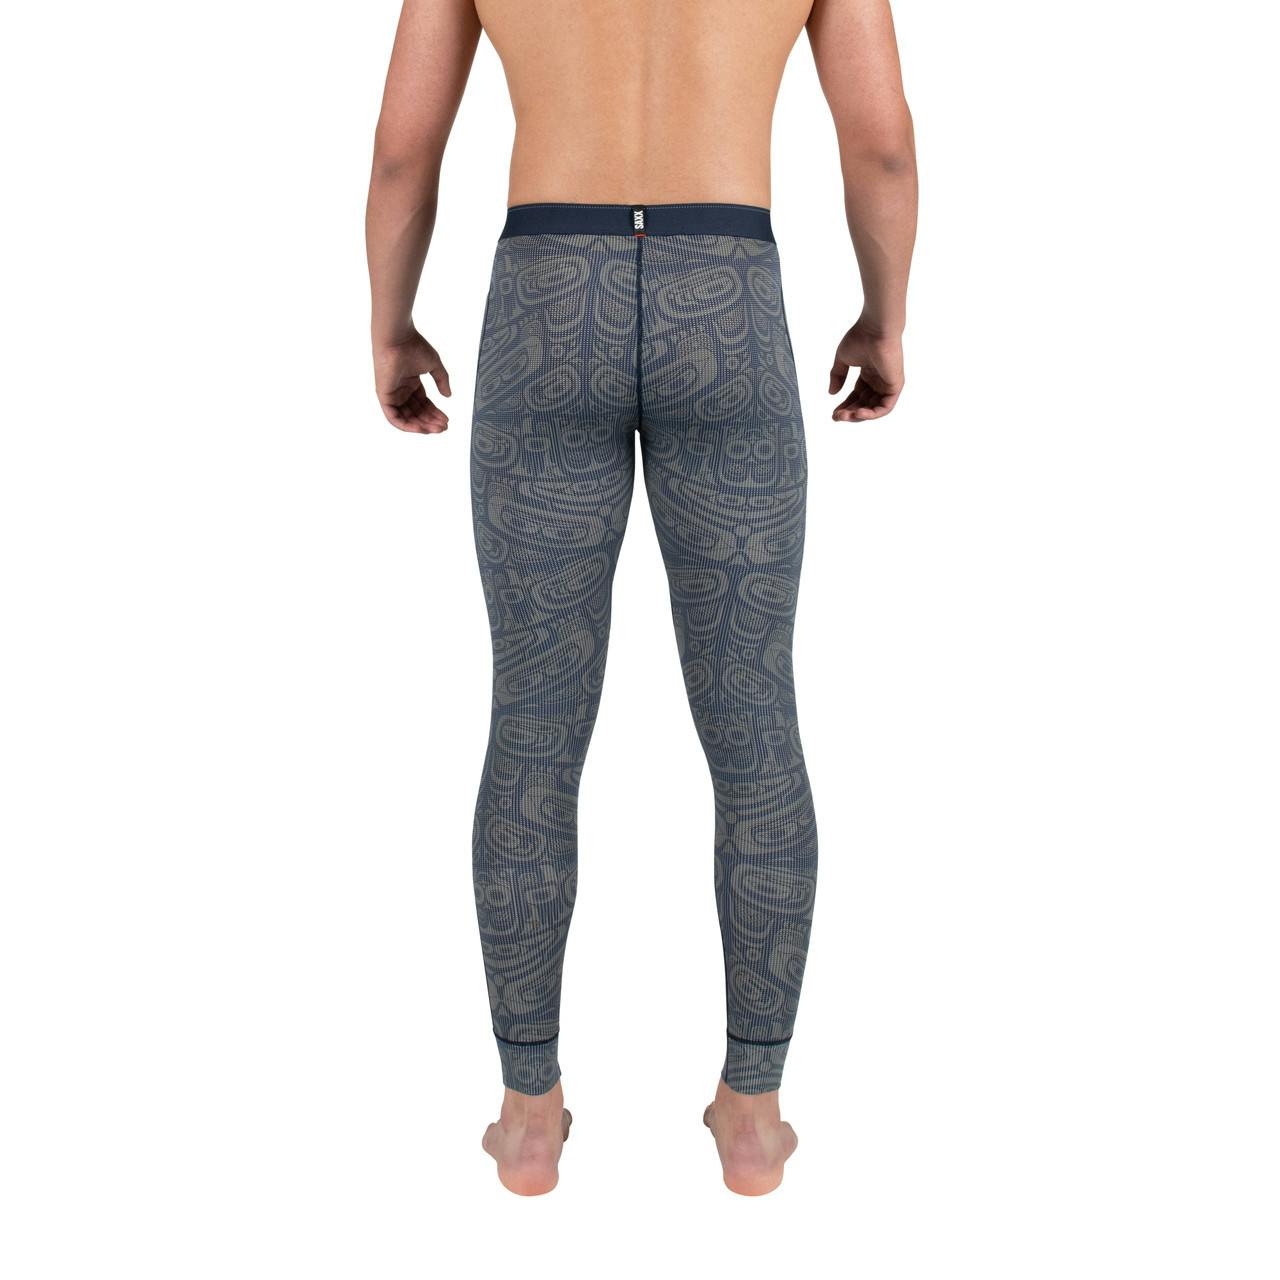 Collant Quest Tight Fly Boîte -Gris